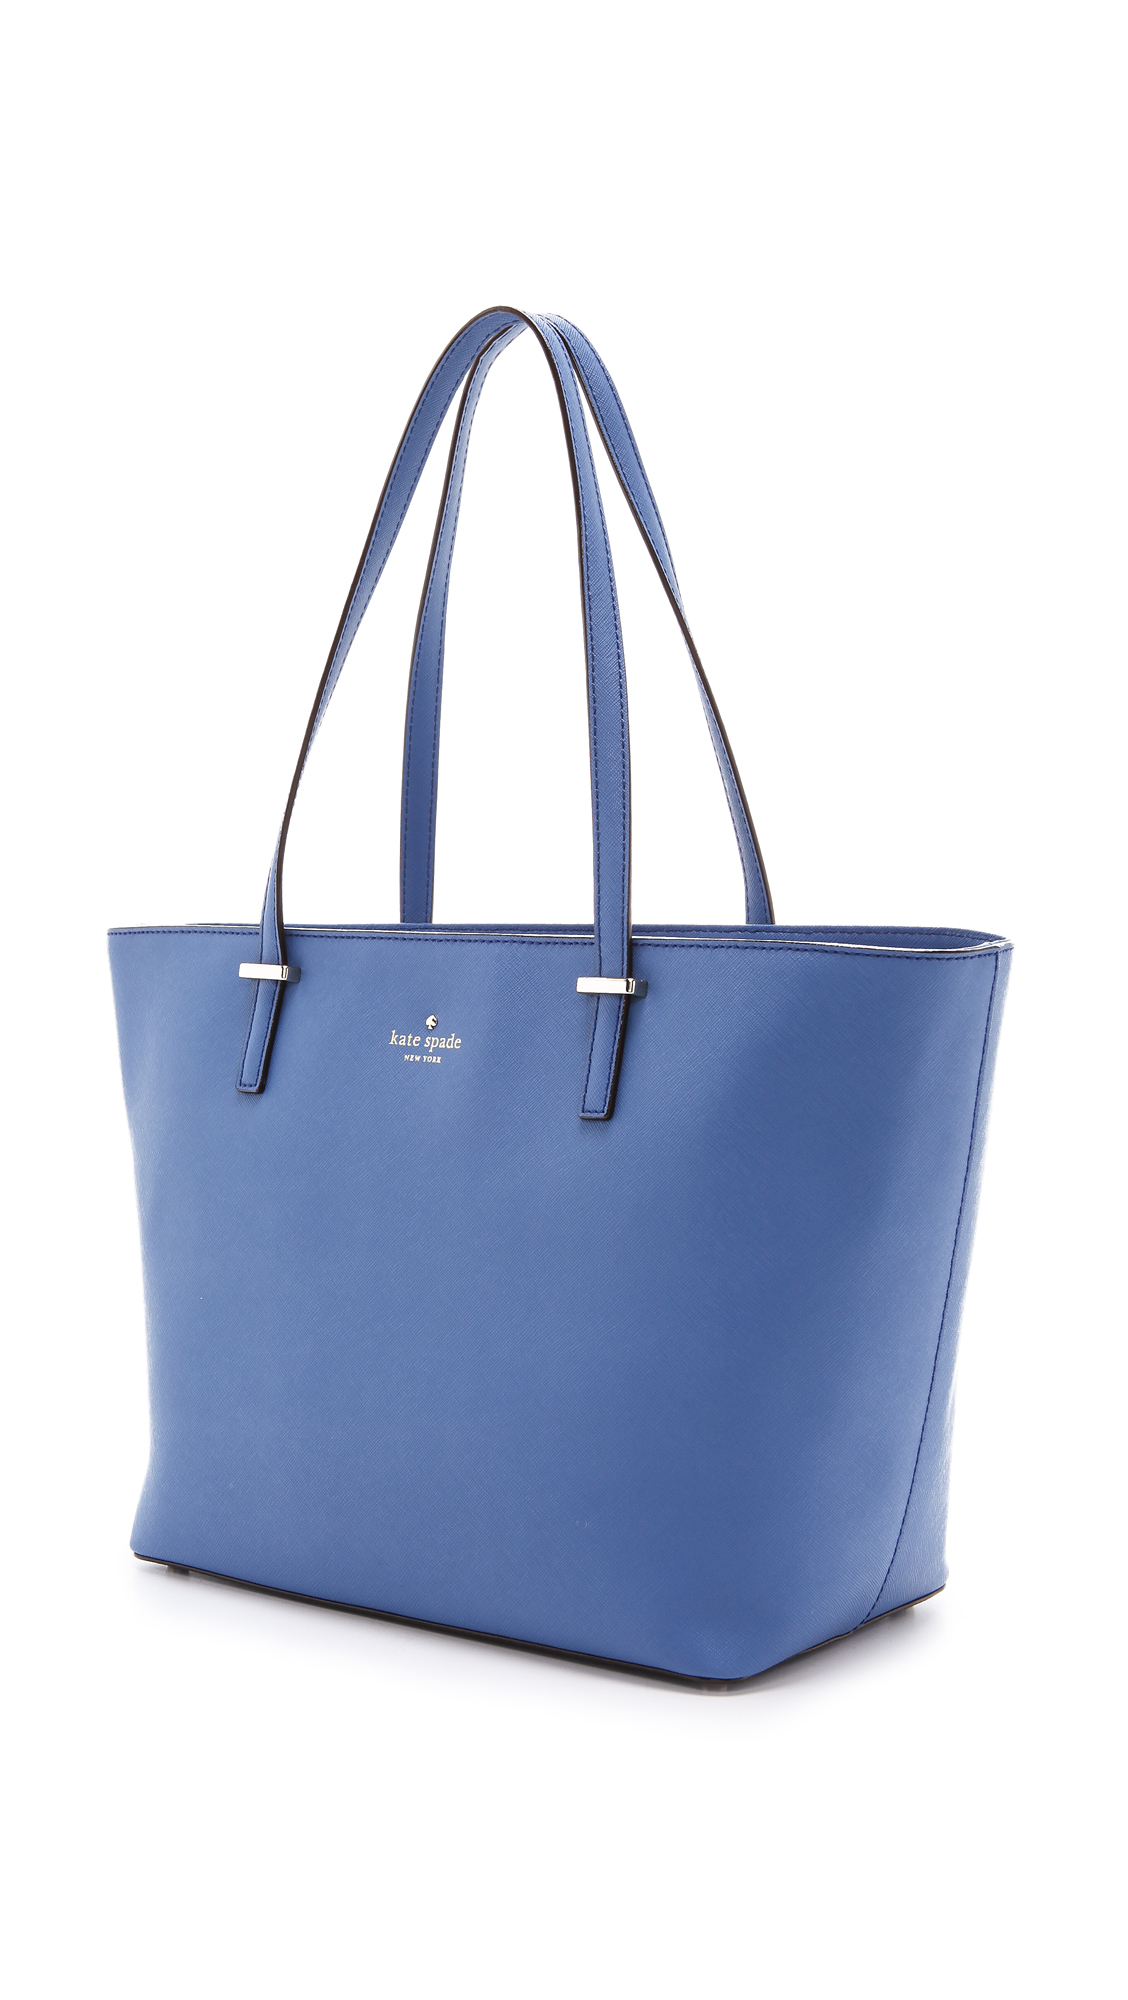 Lyst - Kate Spade New York Small Harmony Tote in Blue